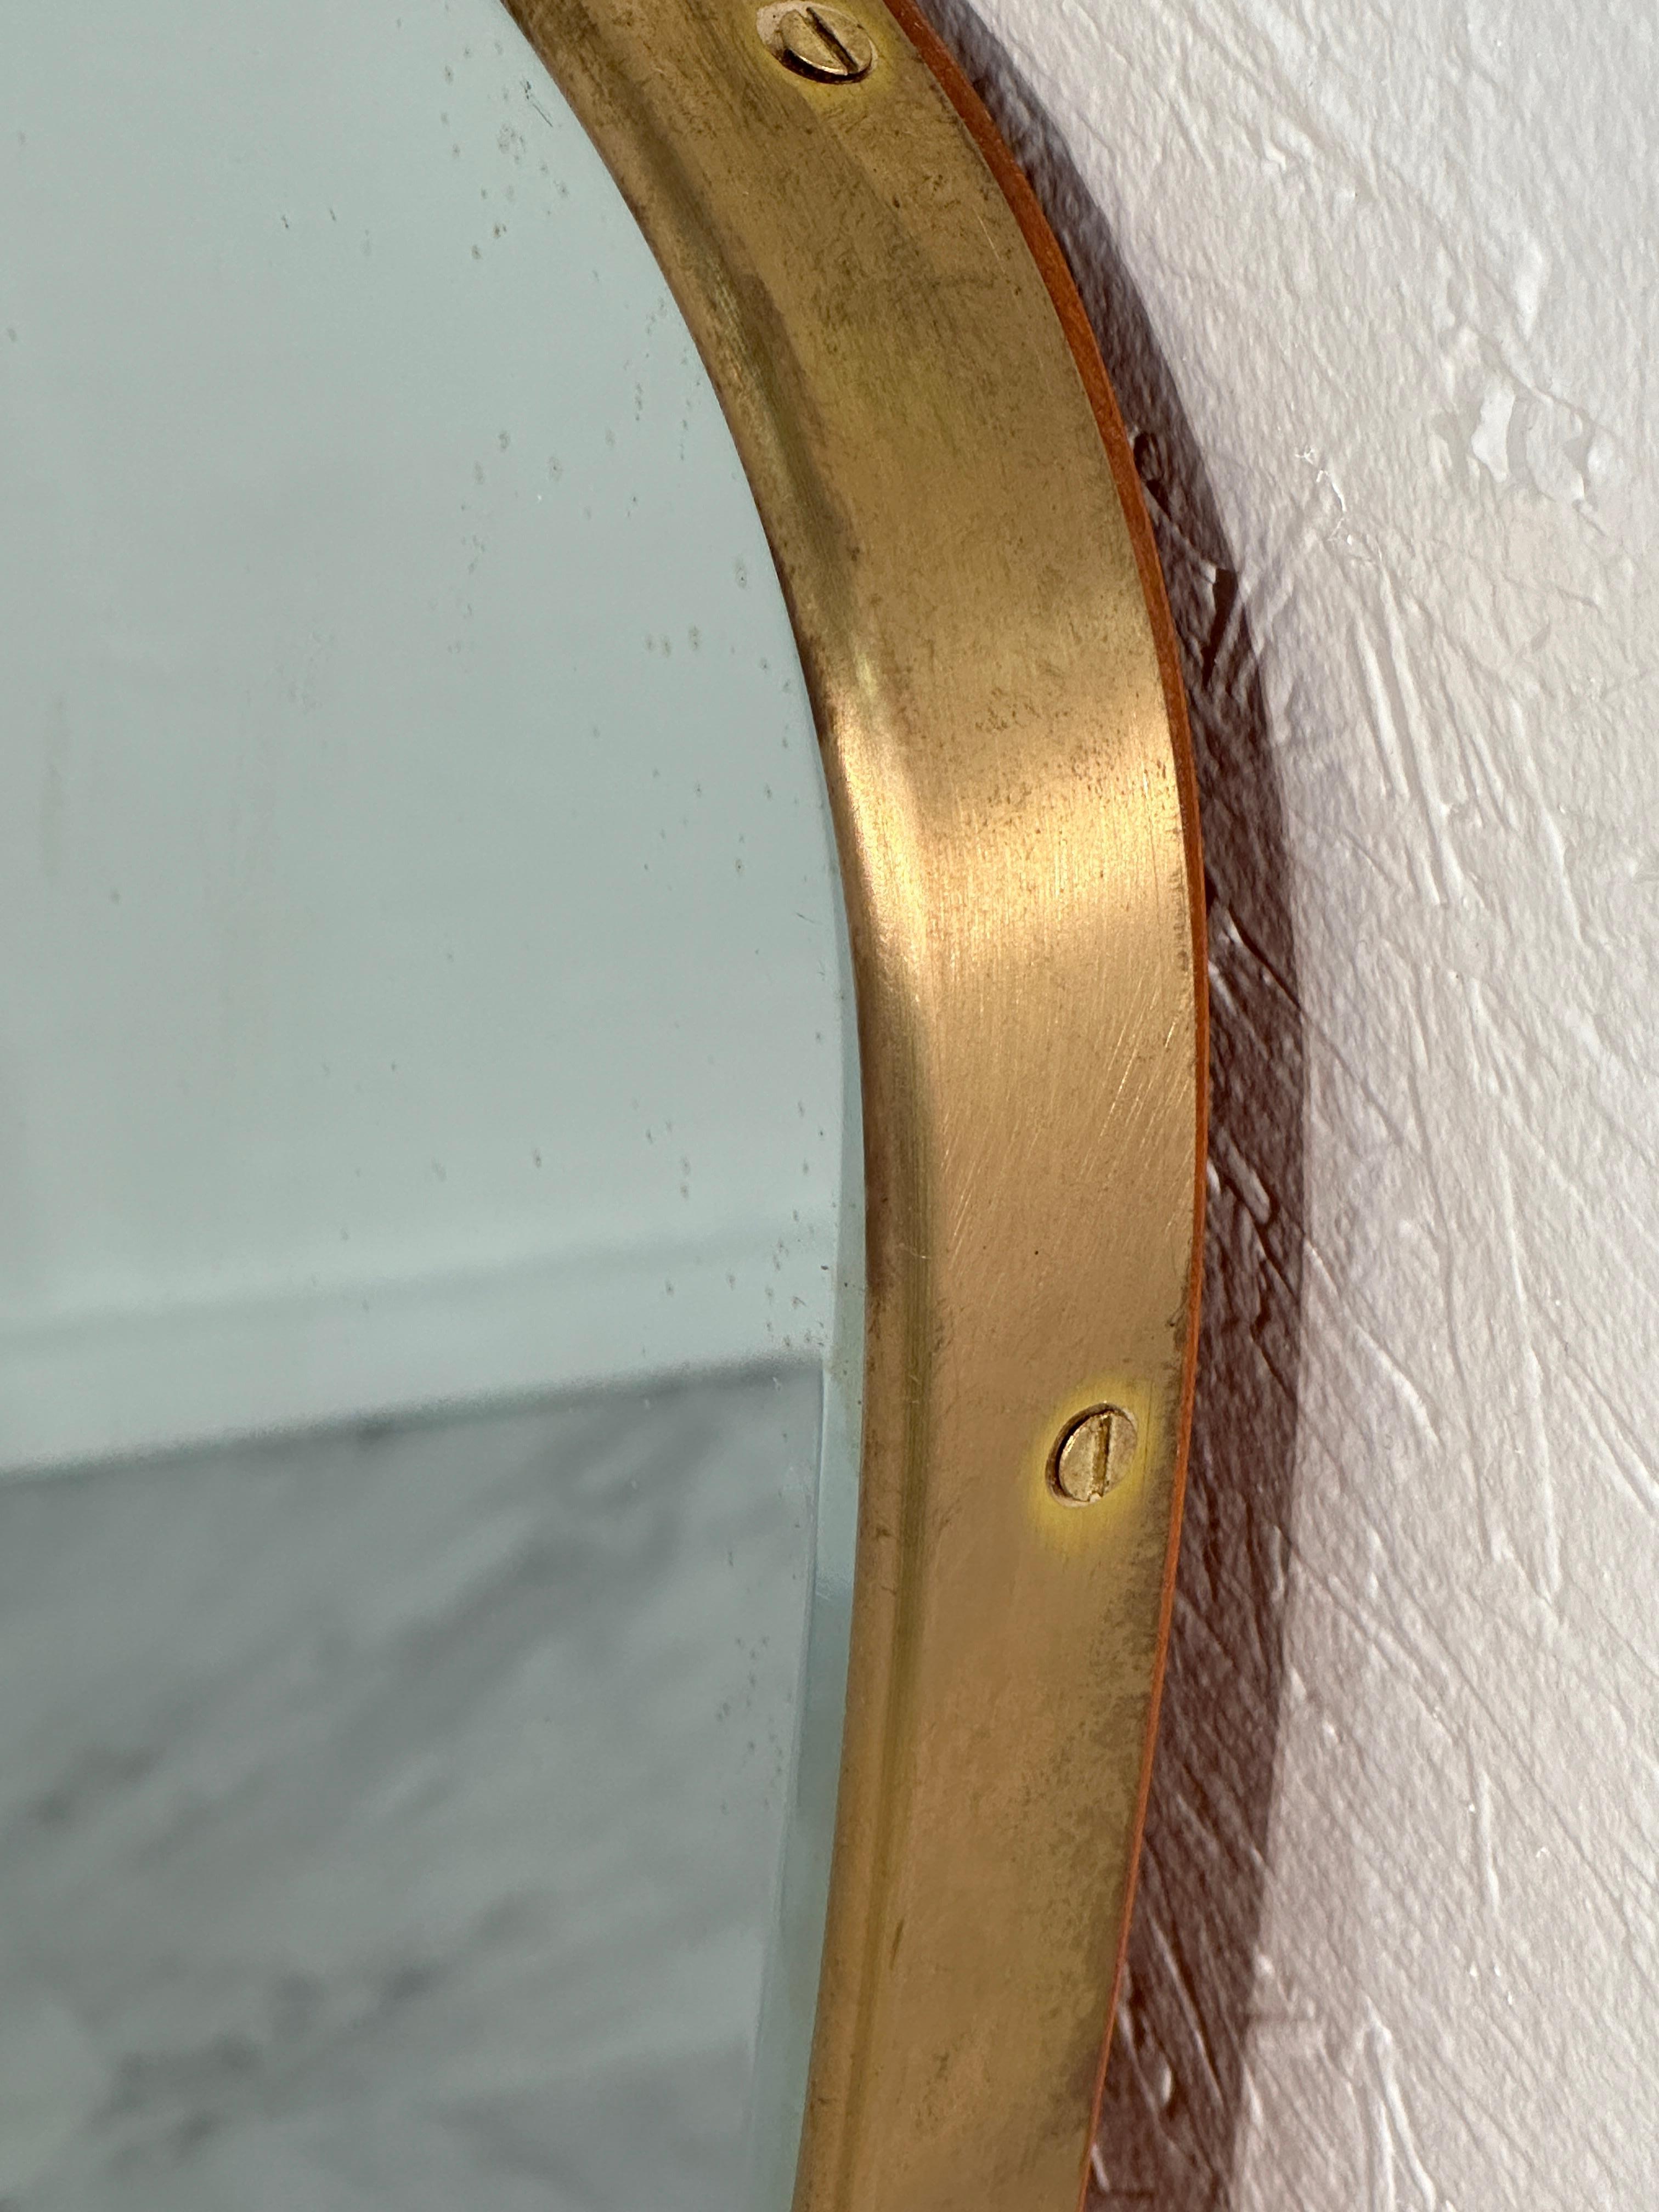 The Vintage Italian Oversize Brass Wall Mirror from the 1970s is a striking piece characterized by its unique wave shape and original patina. Crafted with attention to detail, its oversized design commands attention, while the brass material exudes